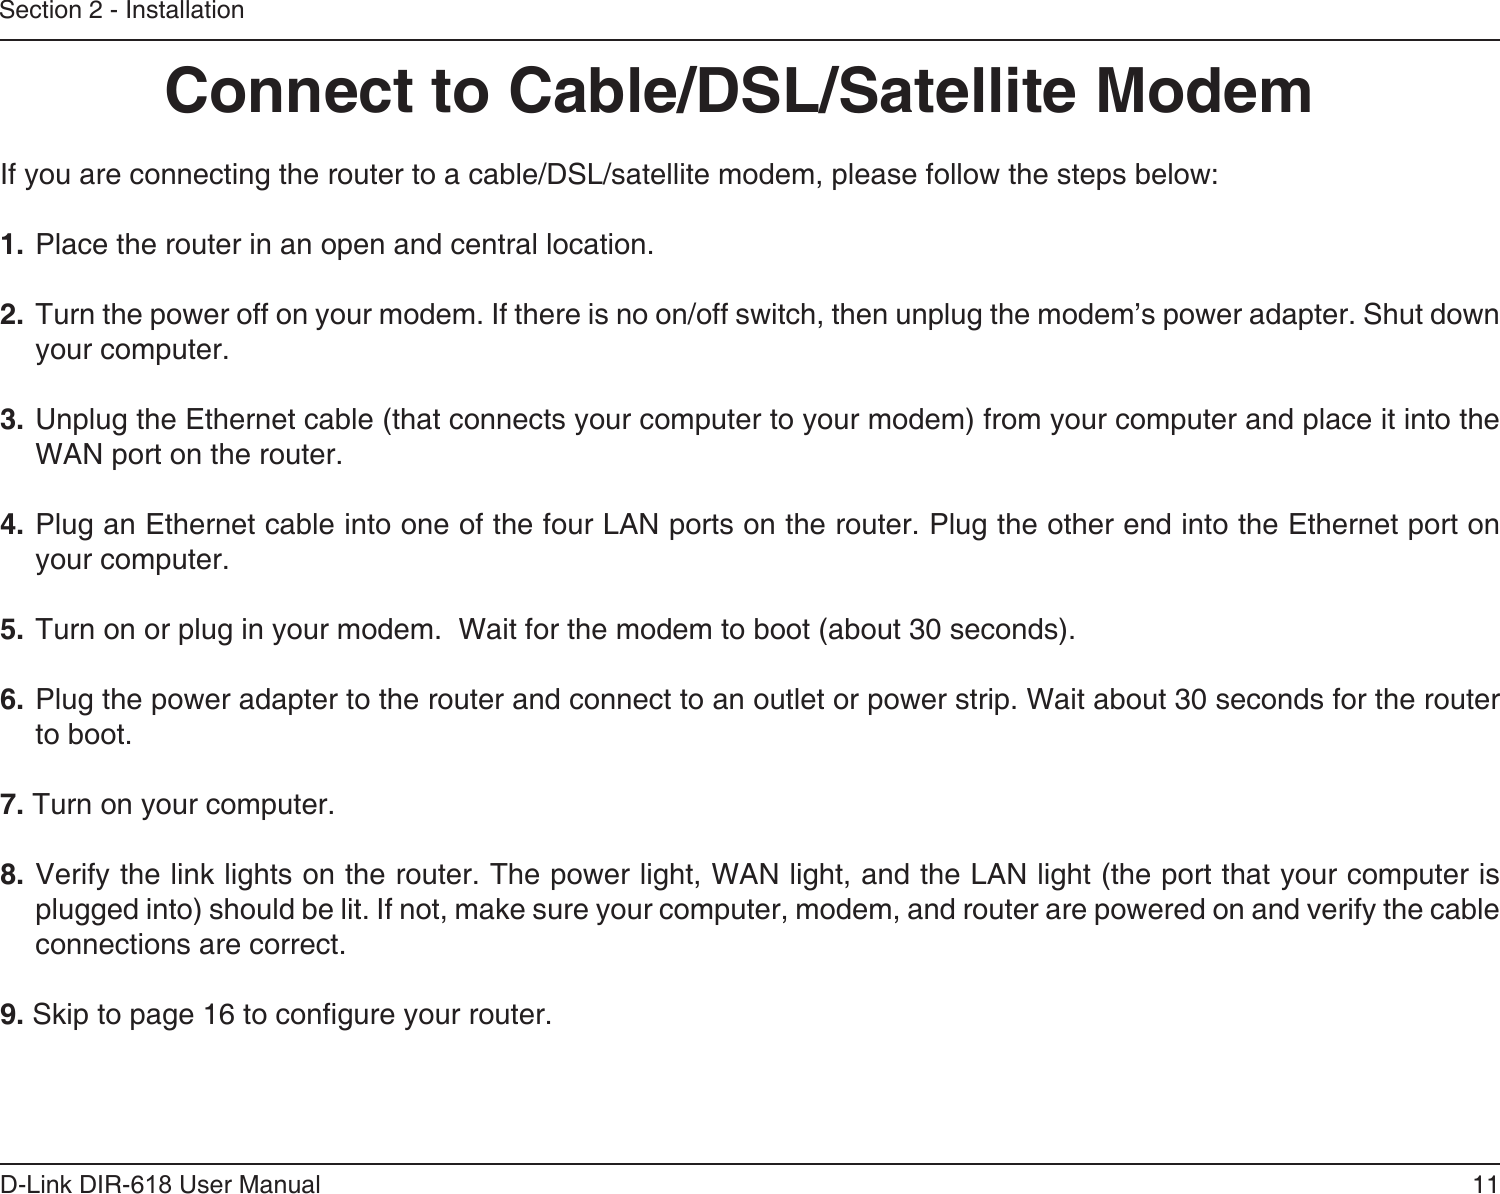 11D-Link DIR-618 User ManualSection 2 - InstallationIf you are connecting the router to a cable/DSL/satellite modem, please follow the steps below:1. Place the router in an open and central location. 2. Turn the power off on your modem. If there is no on/off switch, then unplug the modem’s power adapter. Shut down your computer.3. Unplug the Ethernet cable (that connects your computer to your modem) from your computer and place it into the WAN port on the router.  4. Plug an Ethernet cable into one of the four LAN ports on the router. Plug the other end into the Ethernet port on your computer.5. Turn on or plug in your modem.  Wait for the modem to boot (about 30 seconds). 6. Plug the power adapter to the router and connect to an outlet or power strip. Wait about 30 seconds for the router to boot. 7. Turn on your computer. 8. Verify the link lights on the router. The power light, WAN light, and the LAN light (the port that your computer is plugged into) should be lit. If not, make sure your computer, modem, and router are powered on and verify the cable connections are correct. 9. Skip to page 16 to congure your router. Connect to Cable/DSL/Satellite Modem